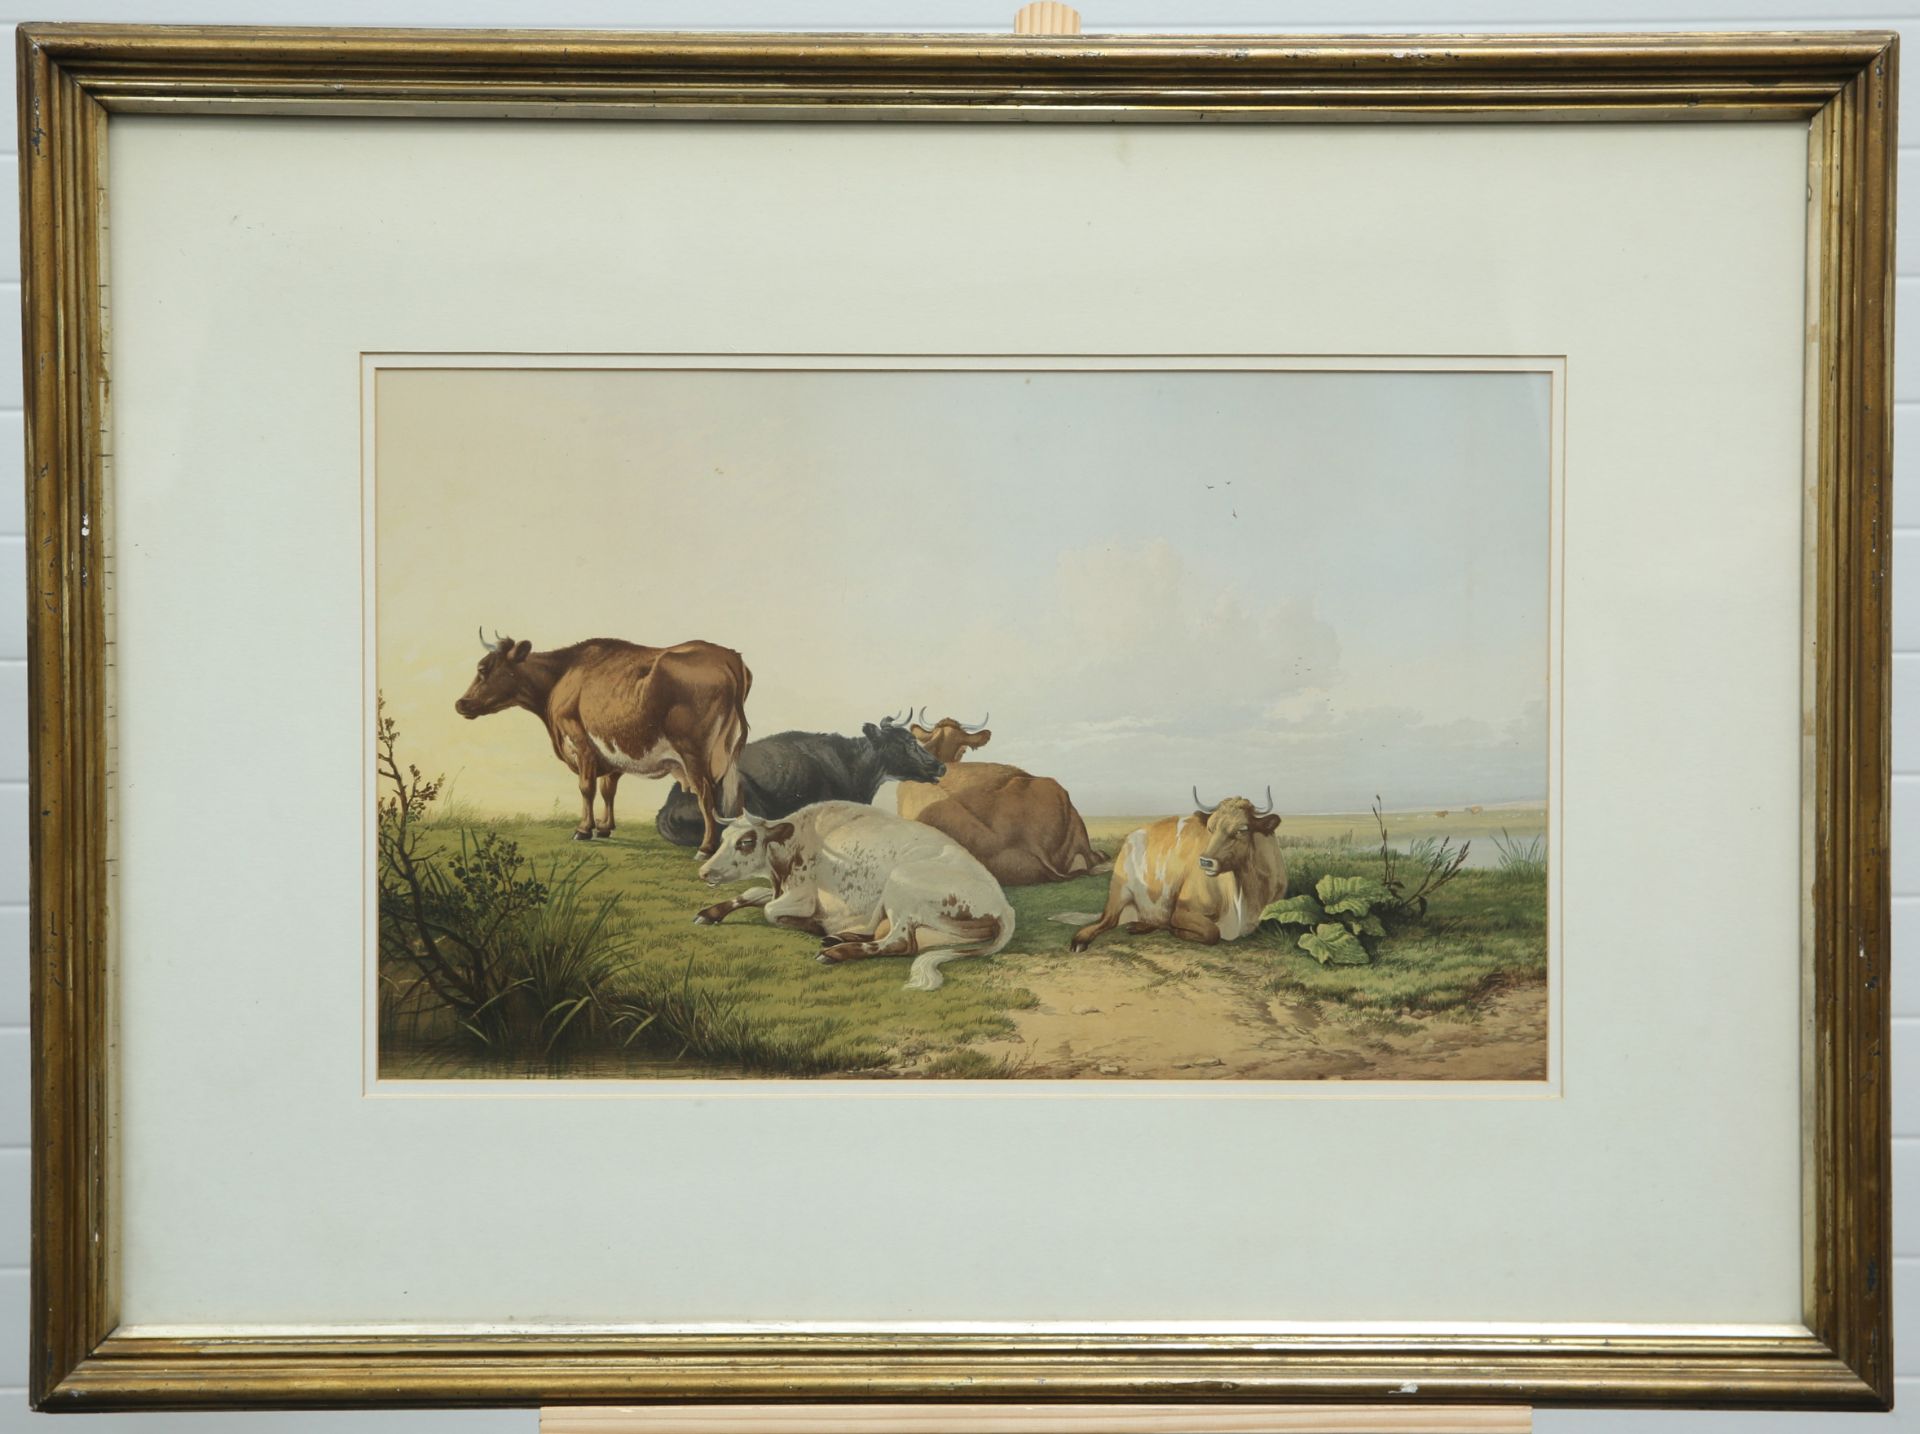 THOMAS SIDNEY COOPER (1803-1902), CATTLE AT REST AND SHEEP AT REST,